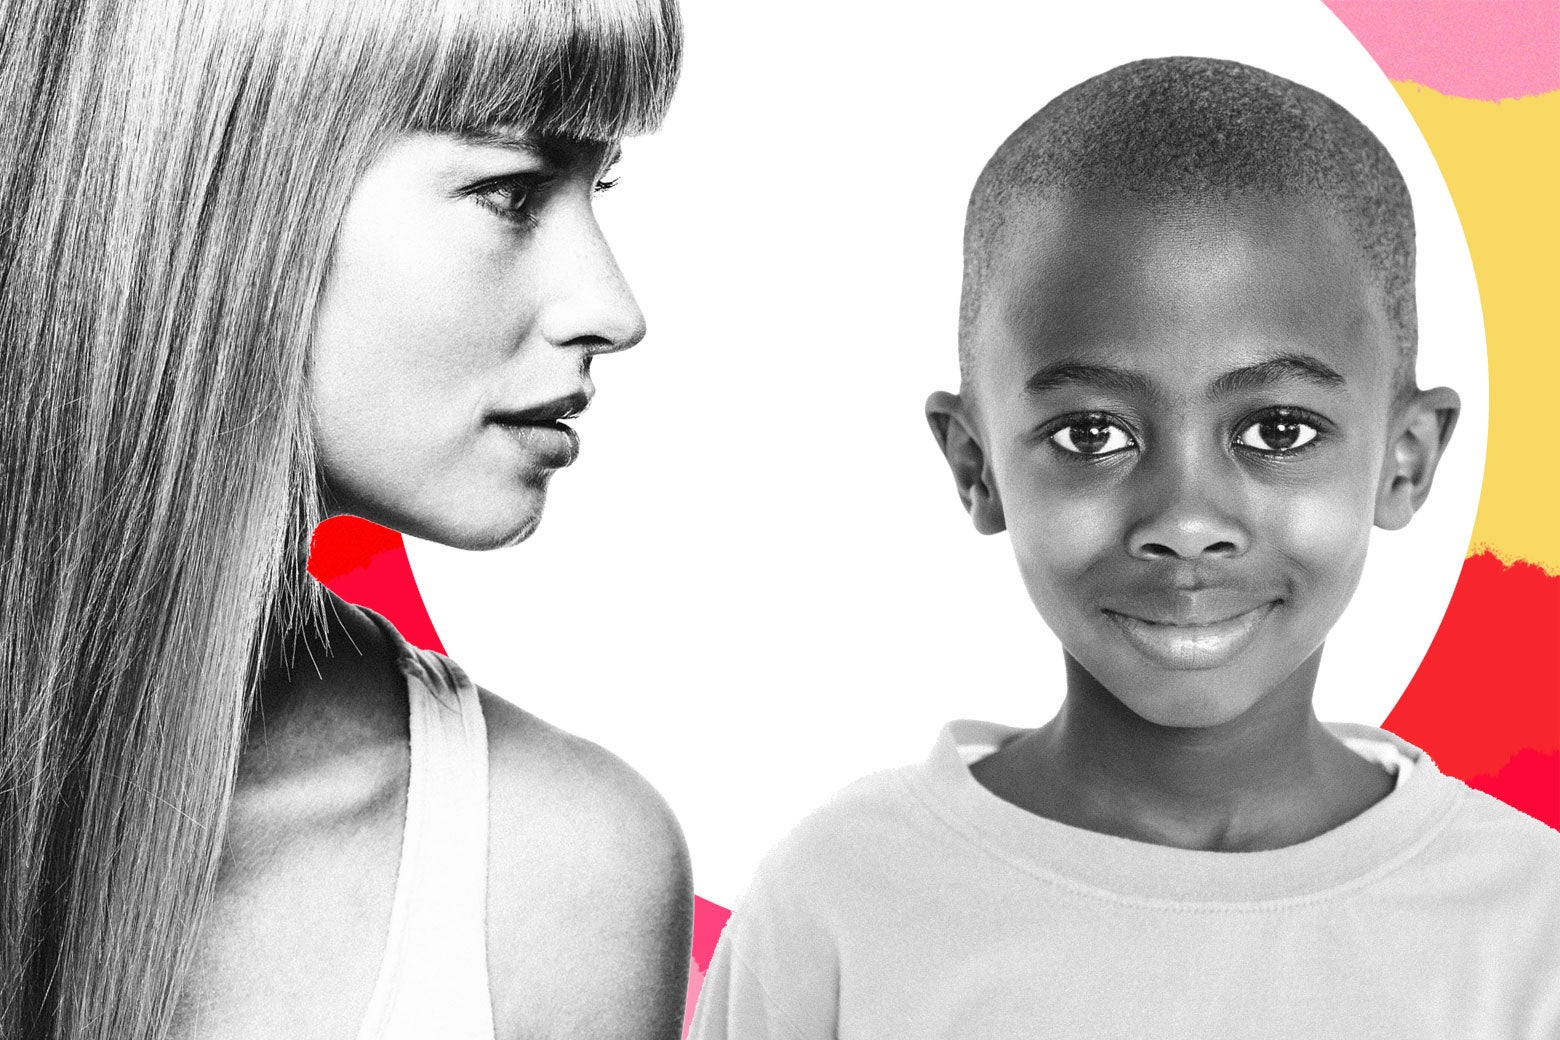 Photo illustration of a white woman and a black child.